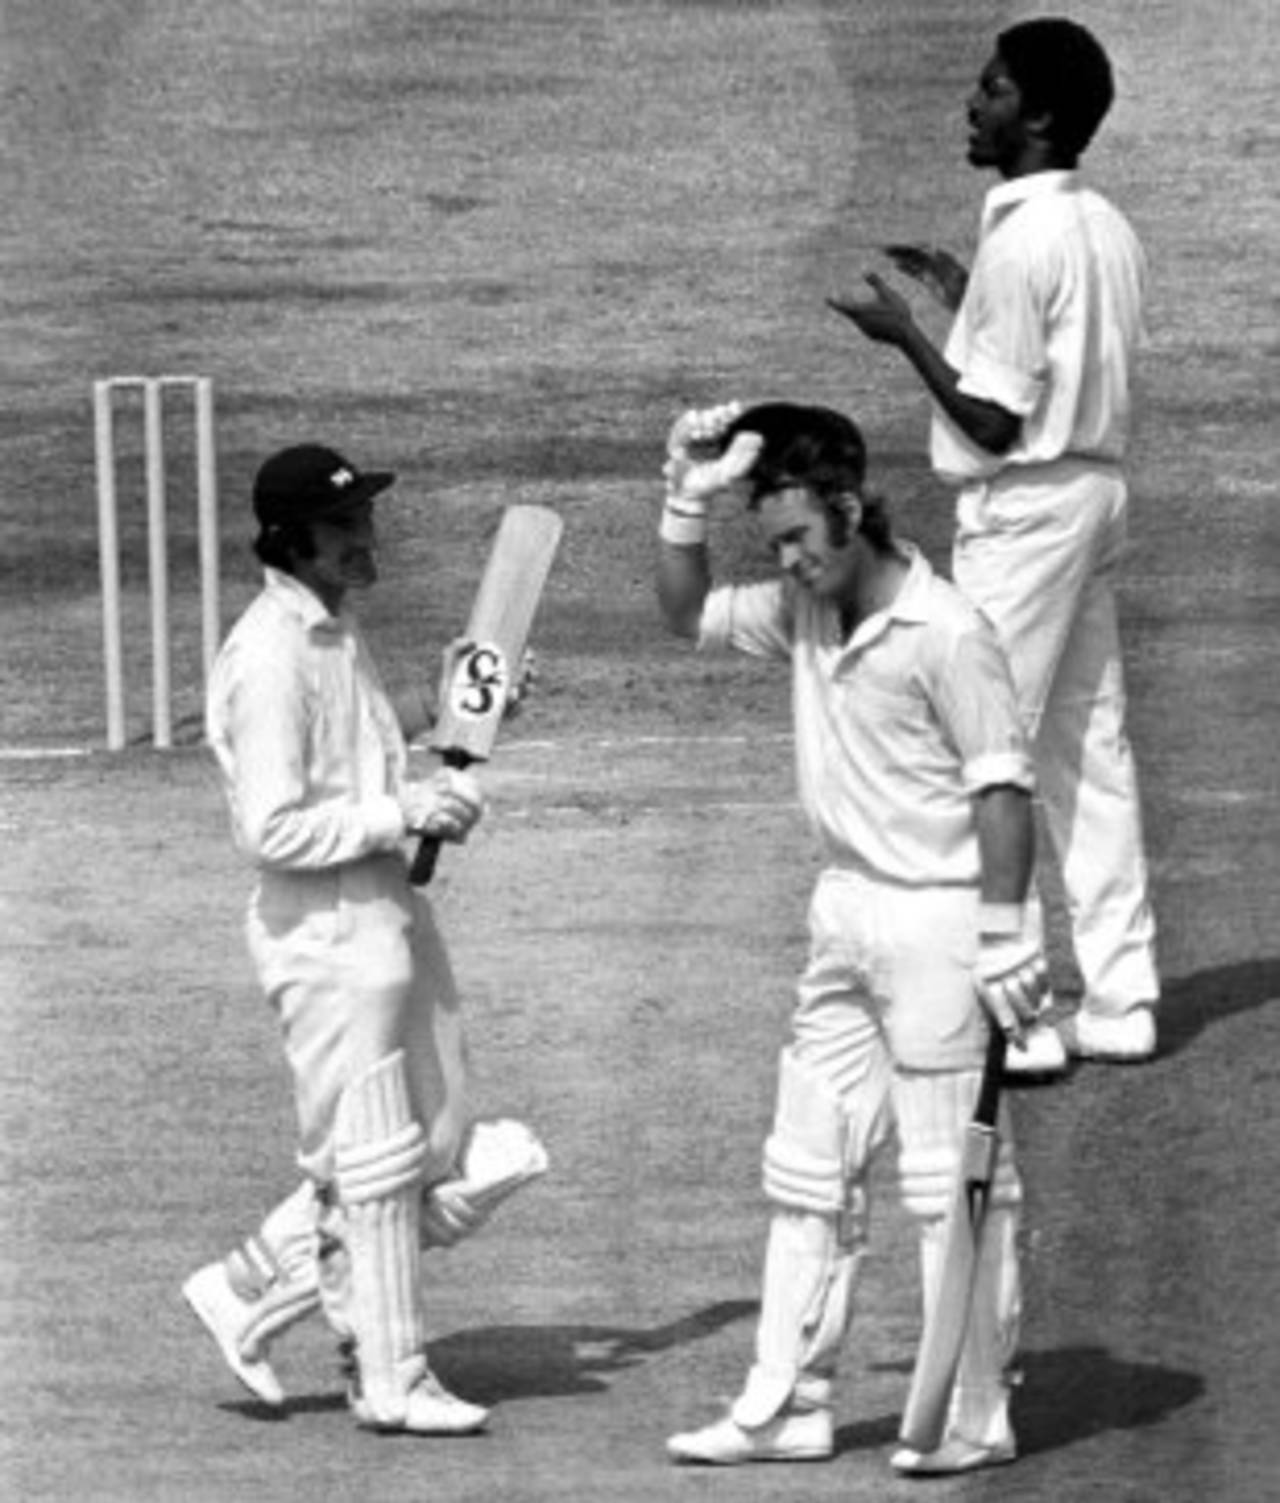 Dennis Amiss is congratulated for his double-century by team-mate Alan Knott and bowler Michael Holding, England v West Indies, 5th Test, The Oval, 4th day, August 16, 1976